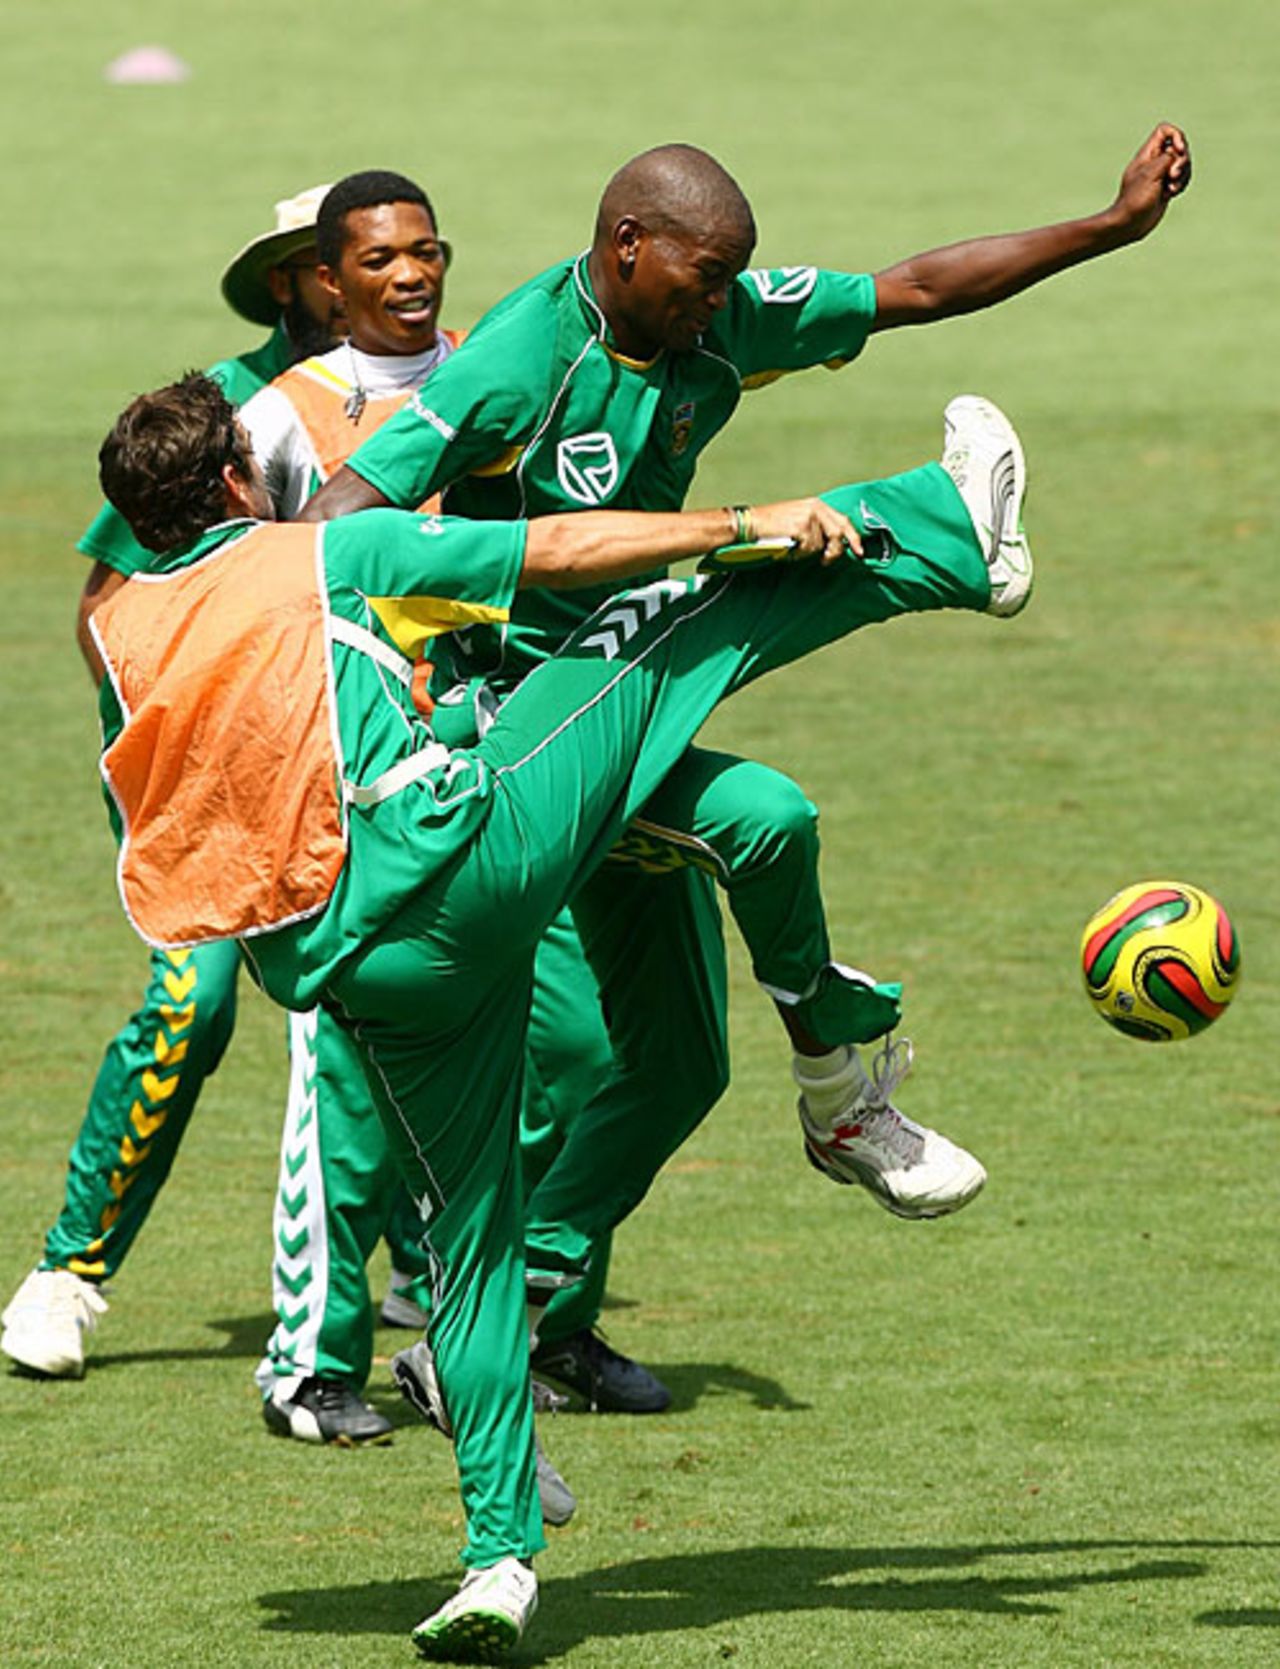 Lonwabo Tsotsobe tries to get his foot to the ball, Sydney, January 22, 2009